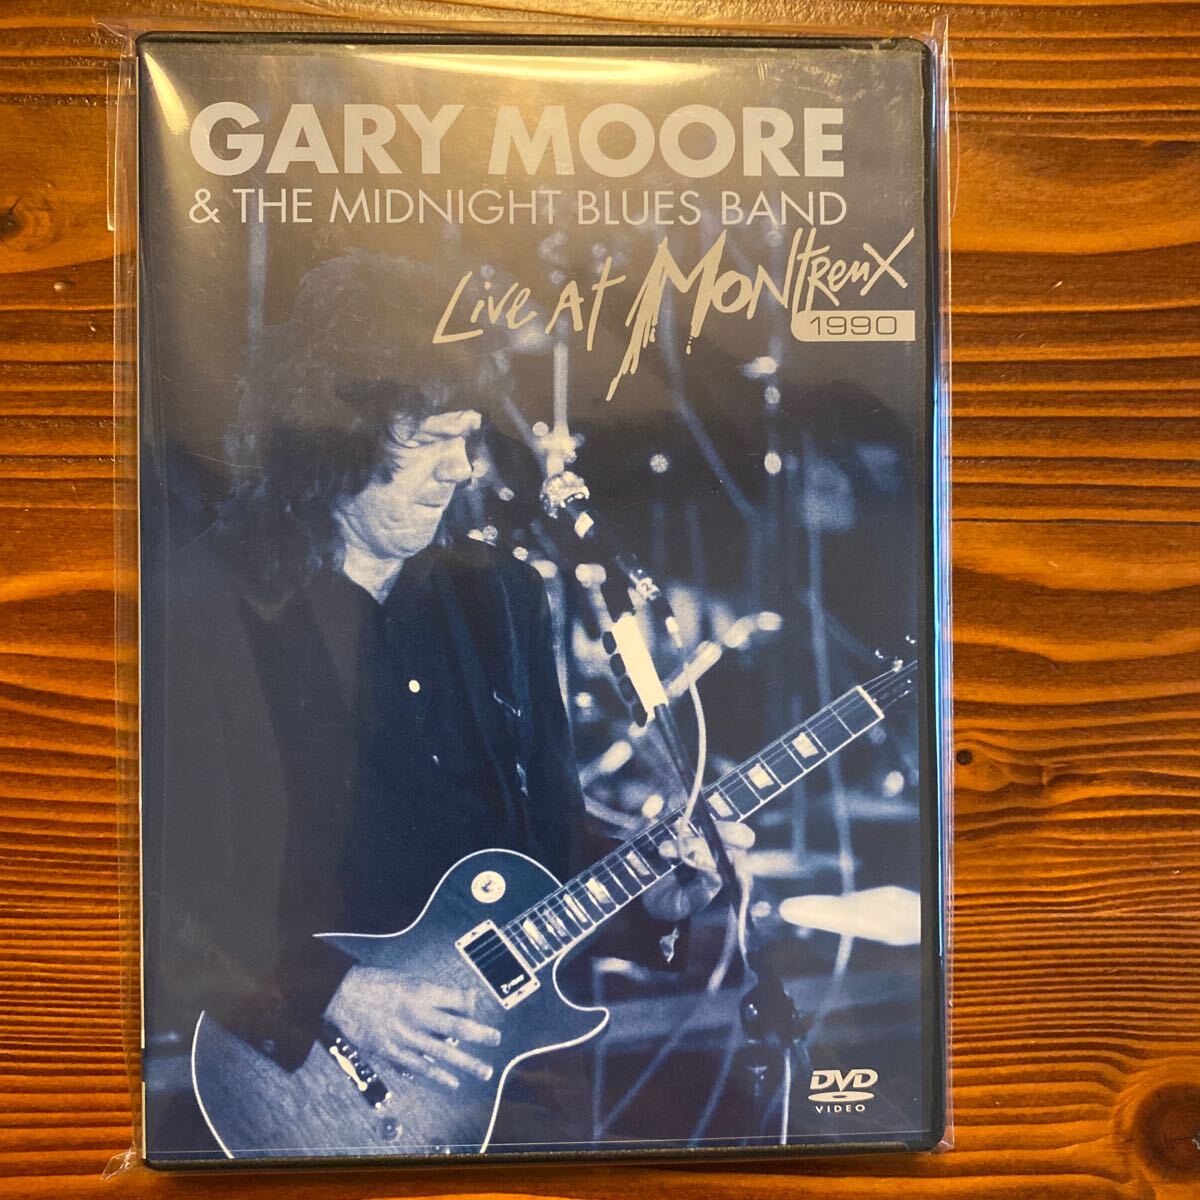 DVD/GARY MOORE ゲイリー・ムーア/Live At Montreux 1990 国内盤/Thin Lizzy,Don Airey,Rainbow,Deep Purple の画像1